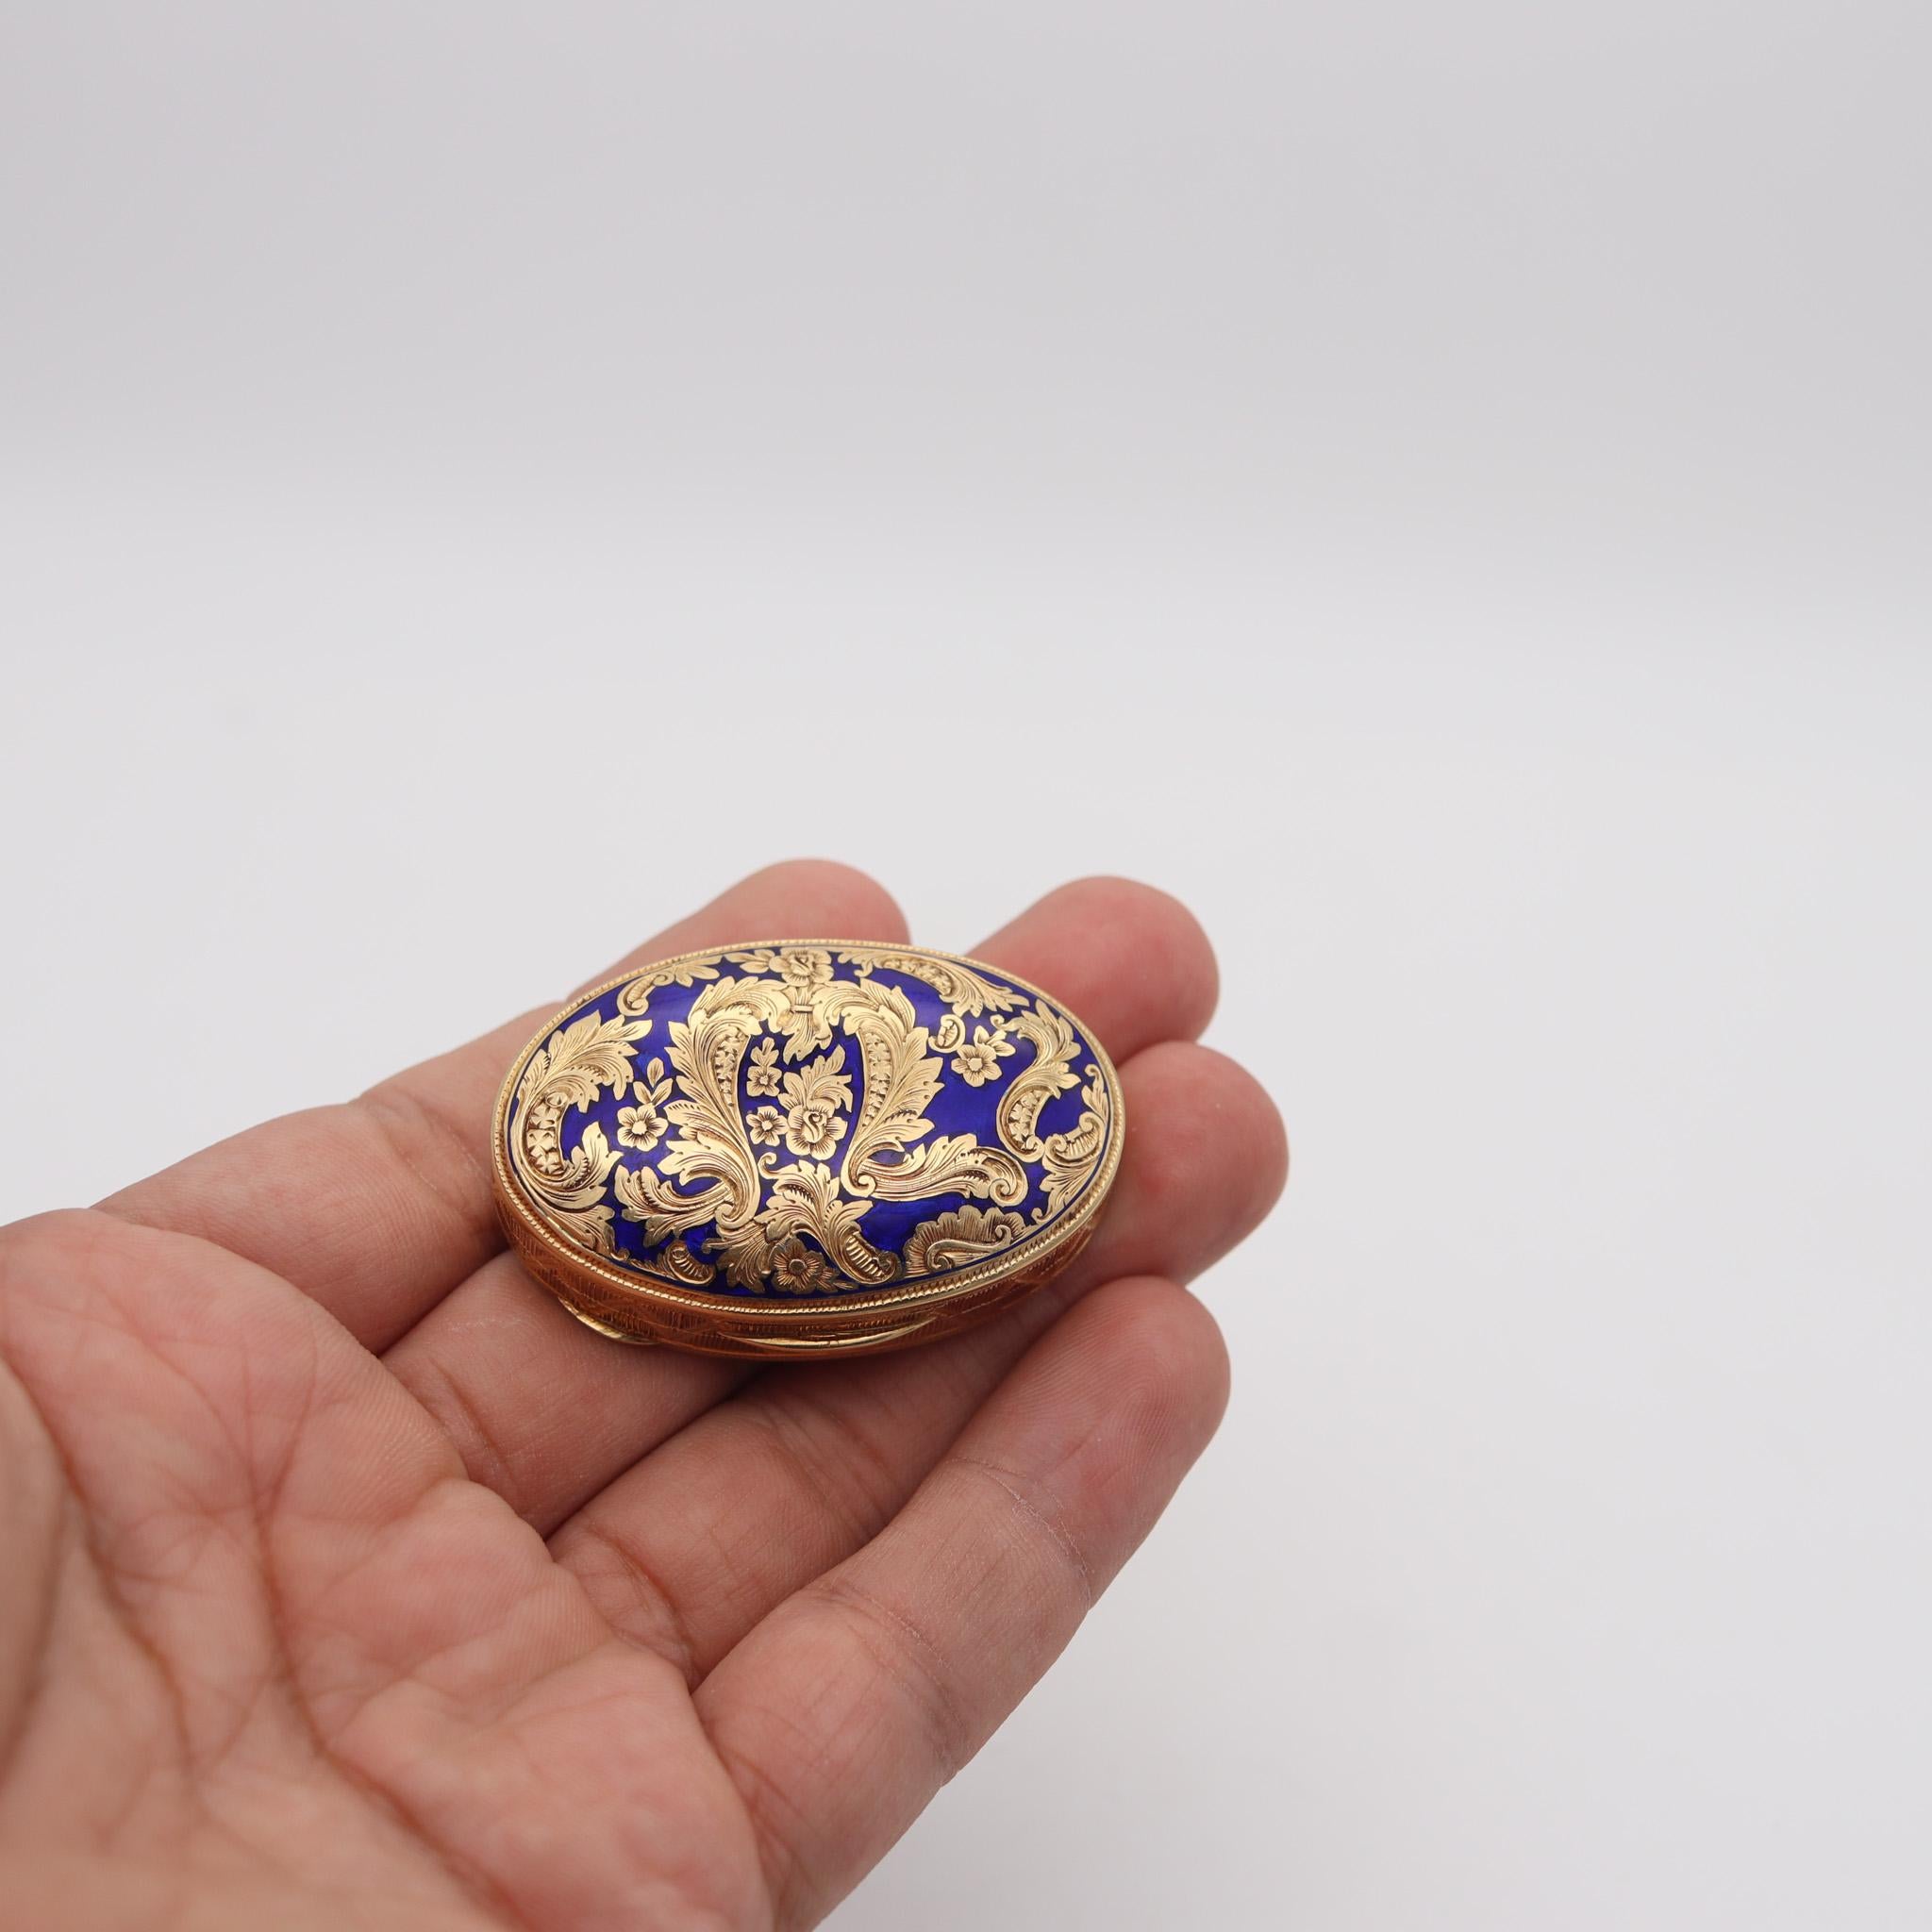 European 1930 Baroque Revival Blue Enameled Pill Box In Solid 18Kt yellow Gold For Sale 3